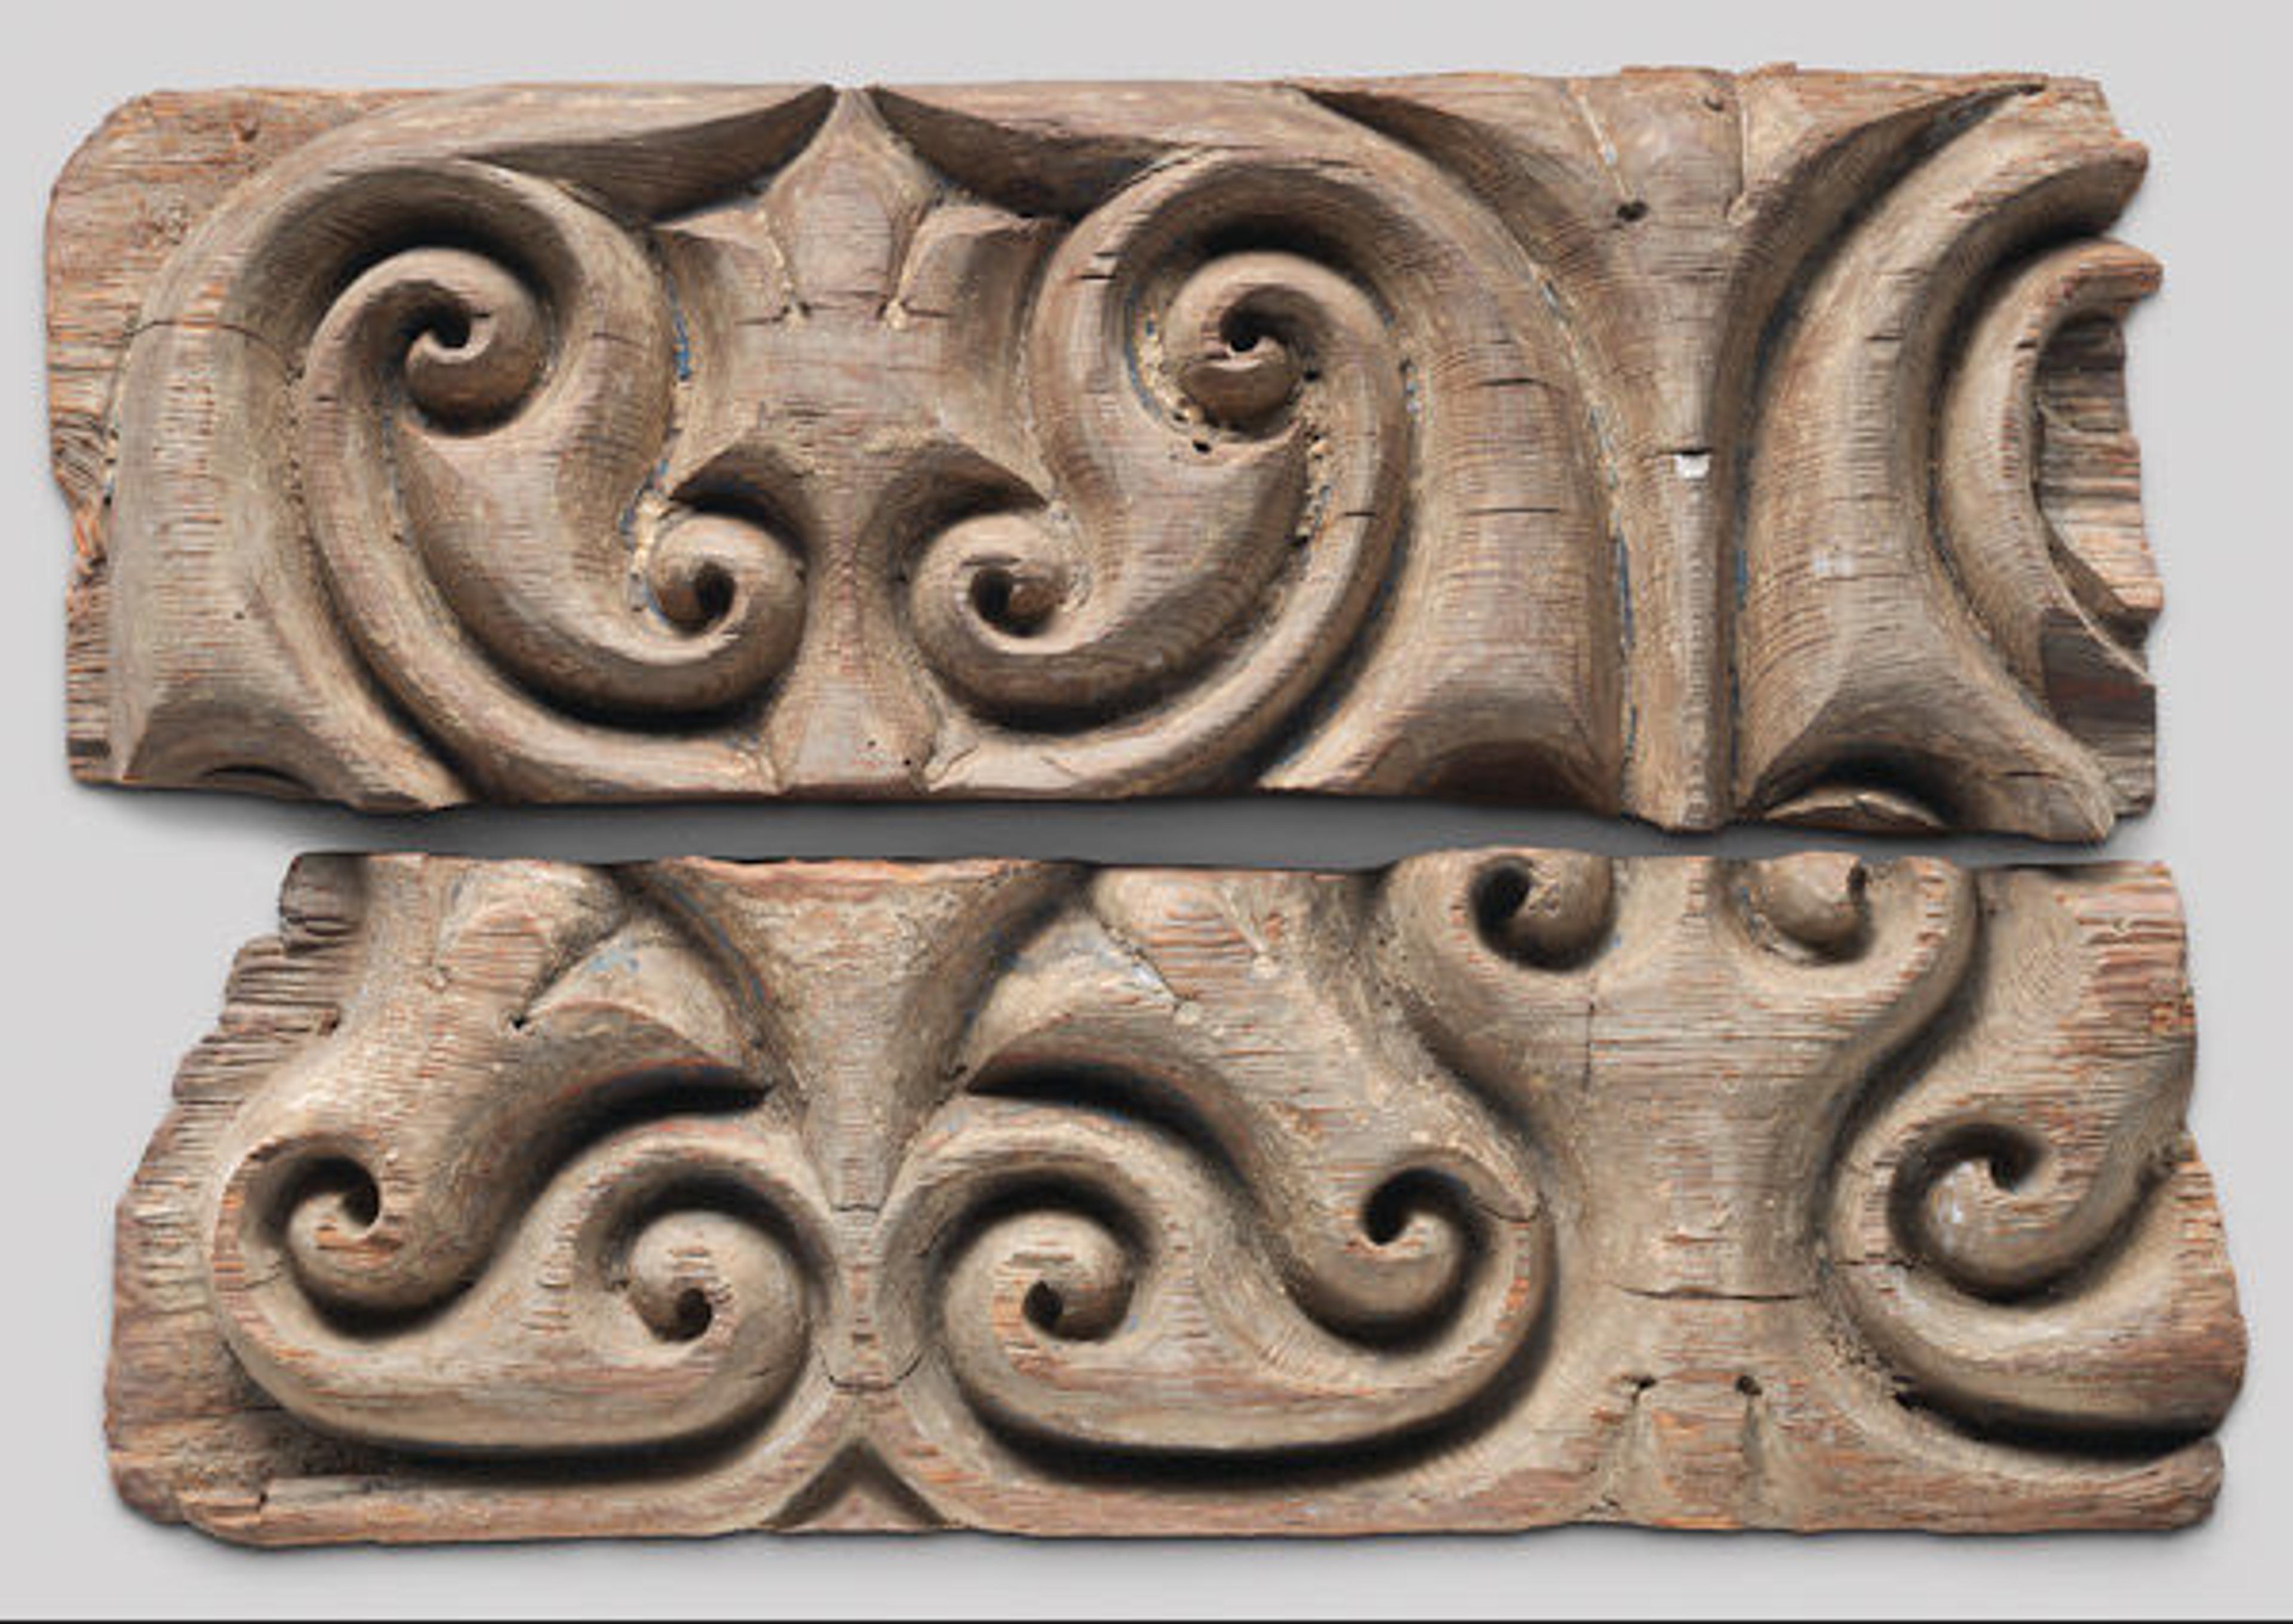 Fig. 1. Panel Carved in the "Beveled Style" with Remains of Later Polychromy, last quarter 10th century. Egypt. Islamic. Wood (pine); carvede; 18 1/2 x 27 x 3 in. (47 x 68.6 x 7.6 cm). The Metropolitan Museum of Art, New York, Rogers Fund, 1932 (32.102.1, 2)